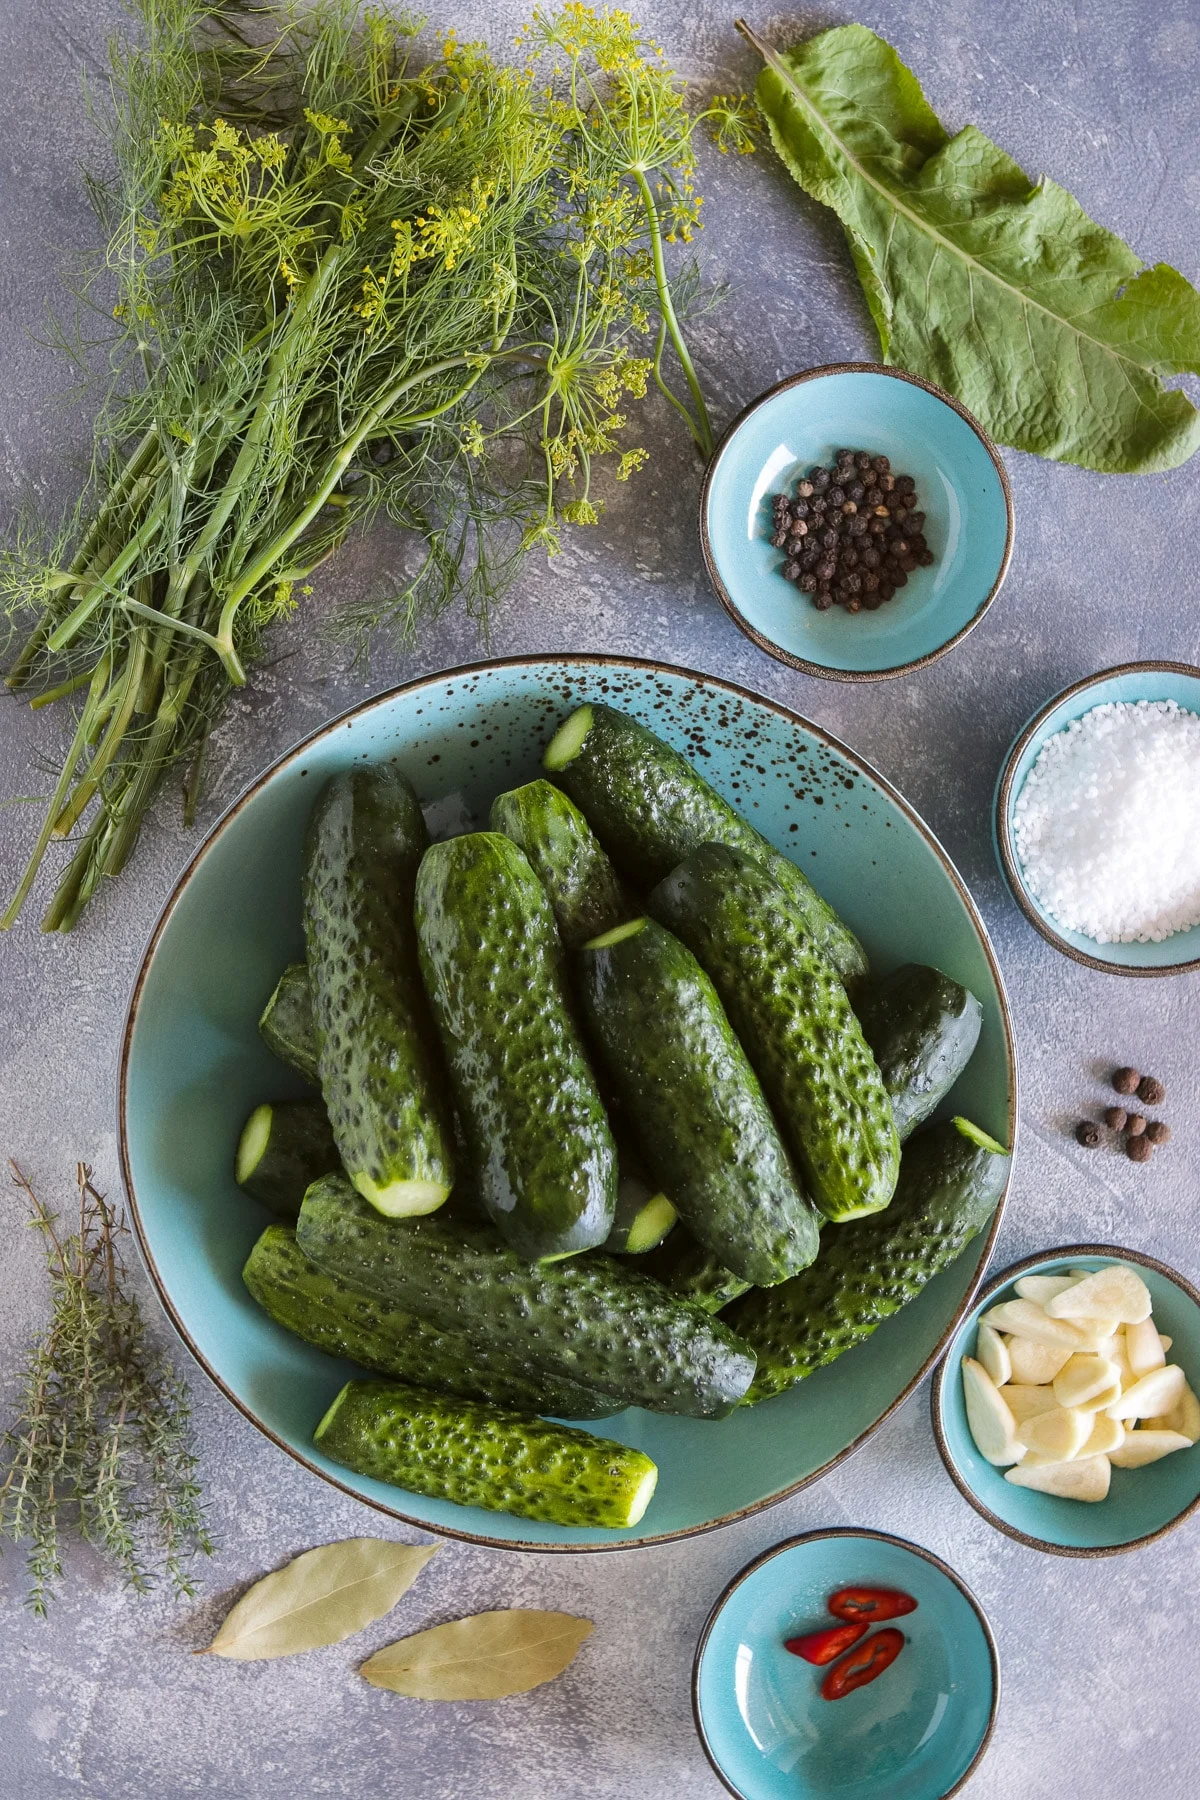 Ingredients for Russian dill pickles